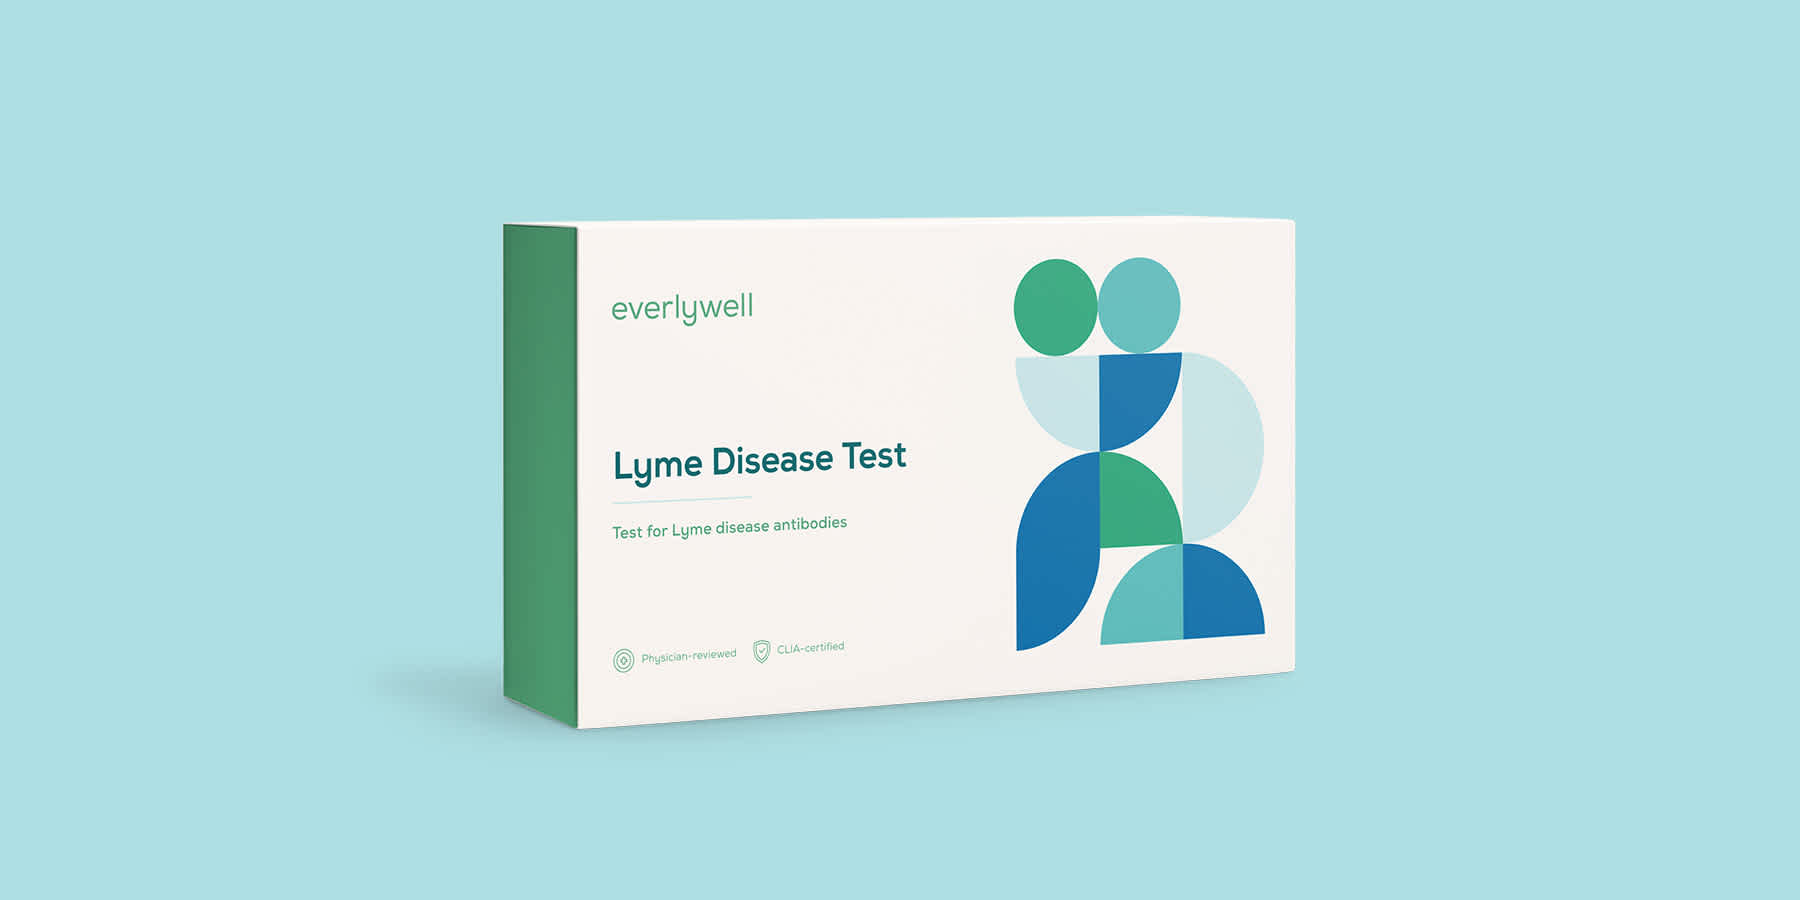 How to Test for Lyme Disease